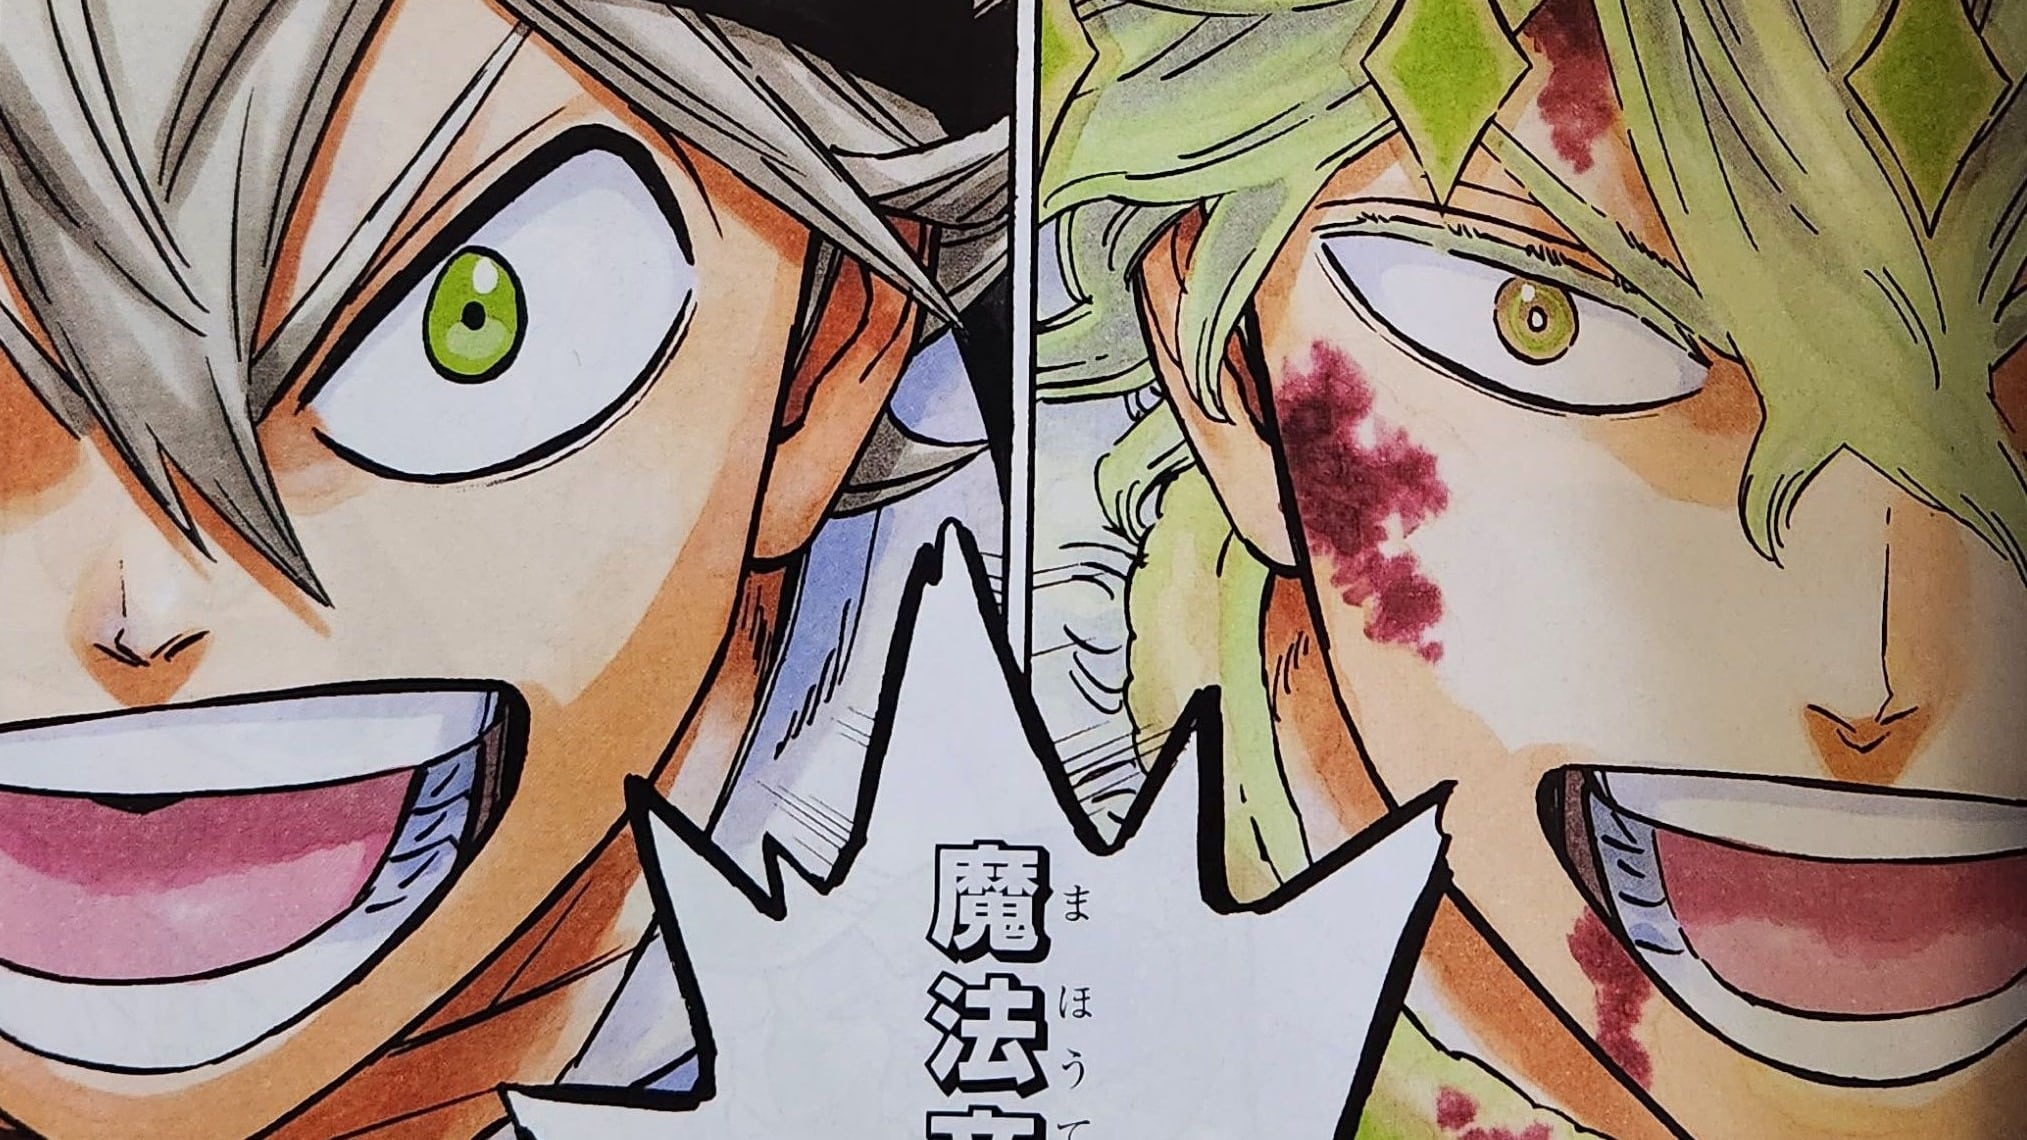 Black Clover Will Be Getting 2 New Chapters in Upcoming Giga Jump Magazine, Release Date Revealed